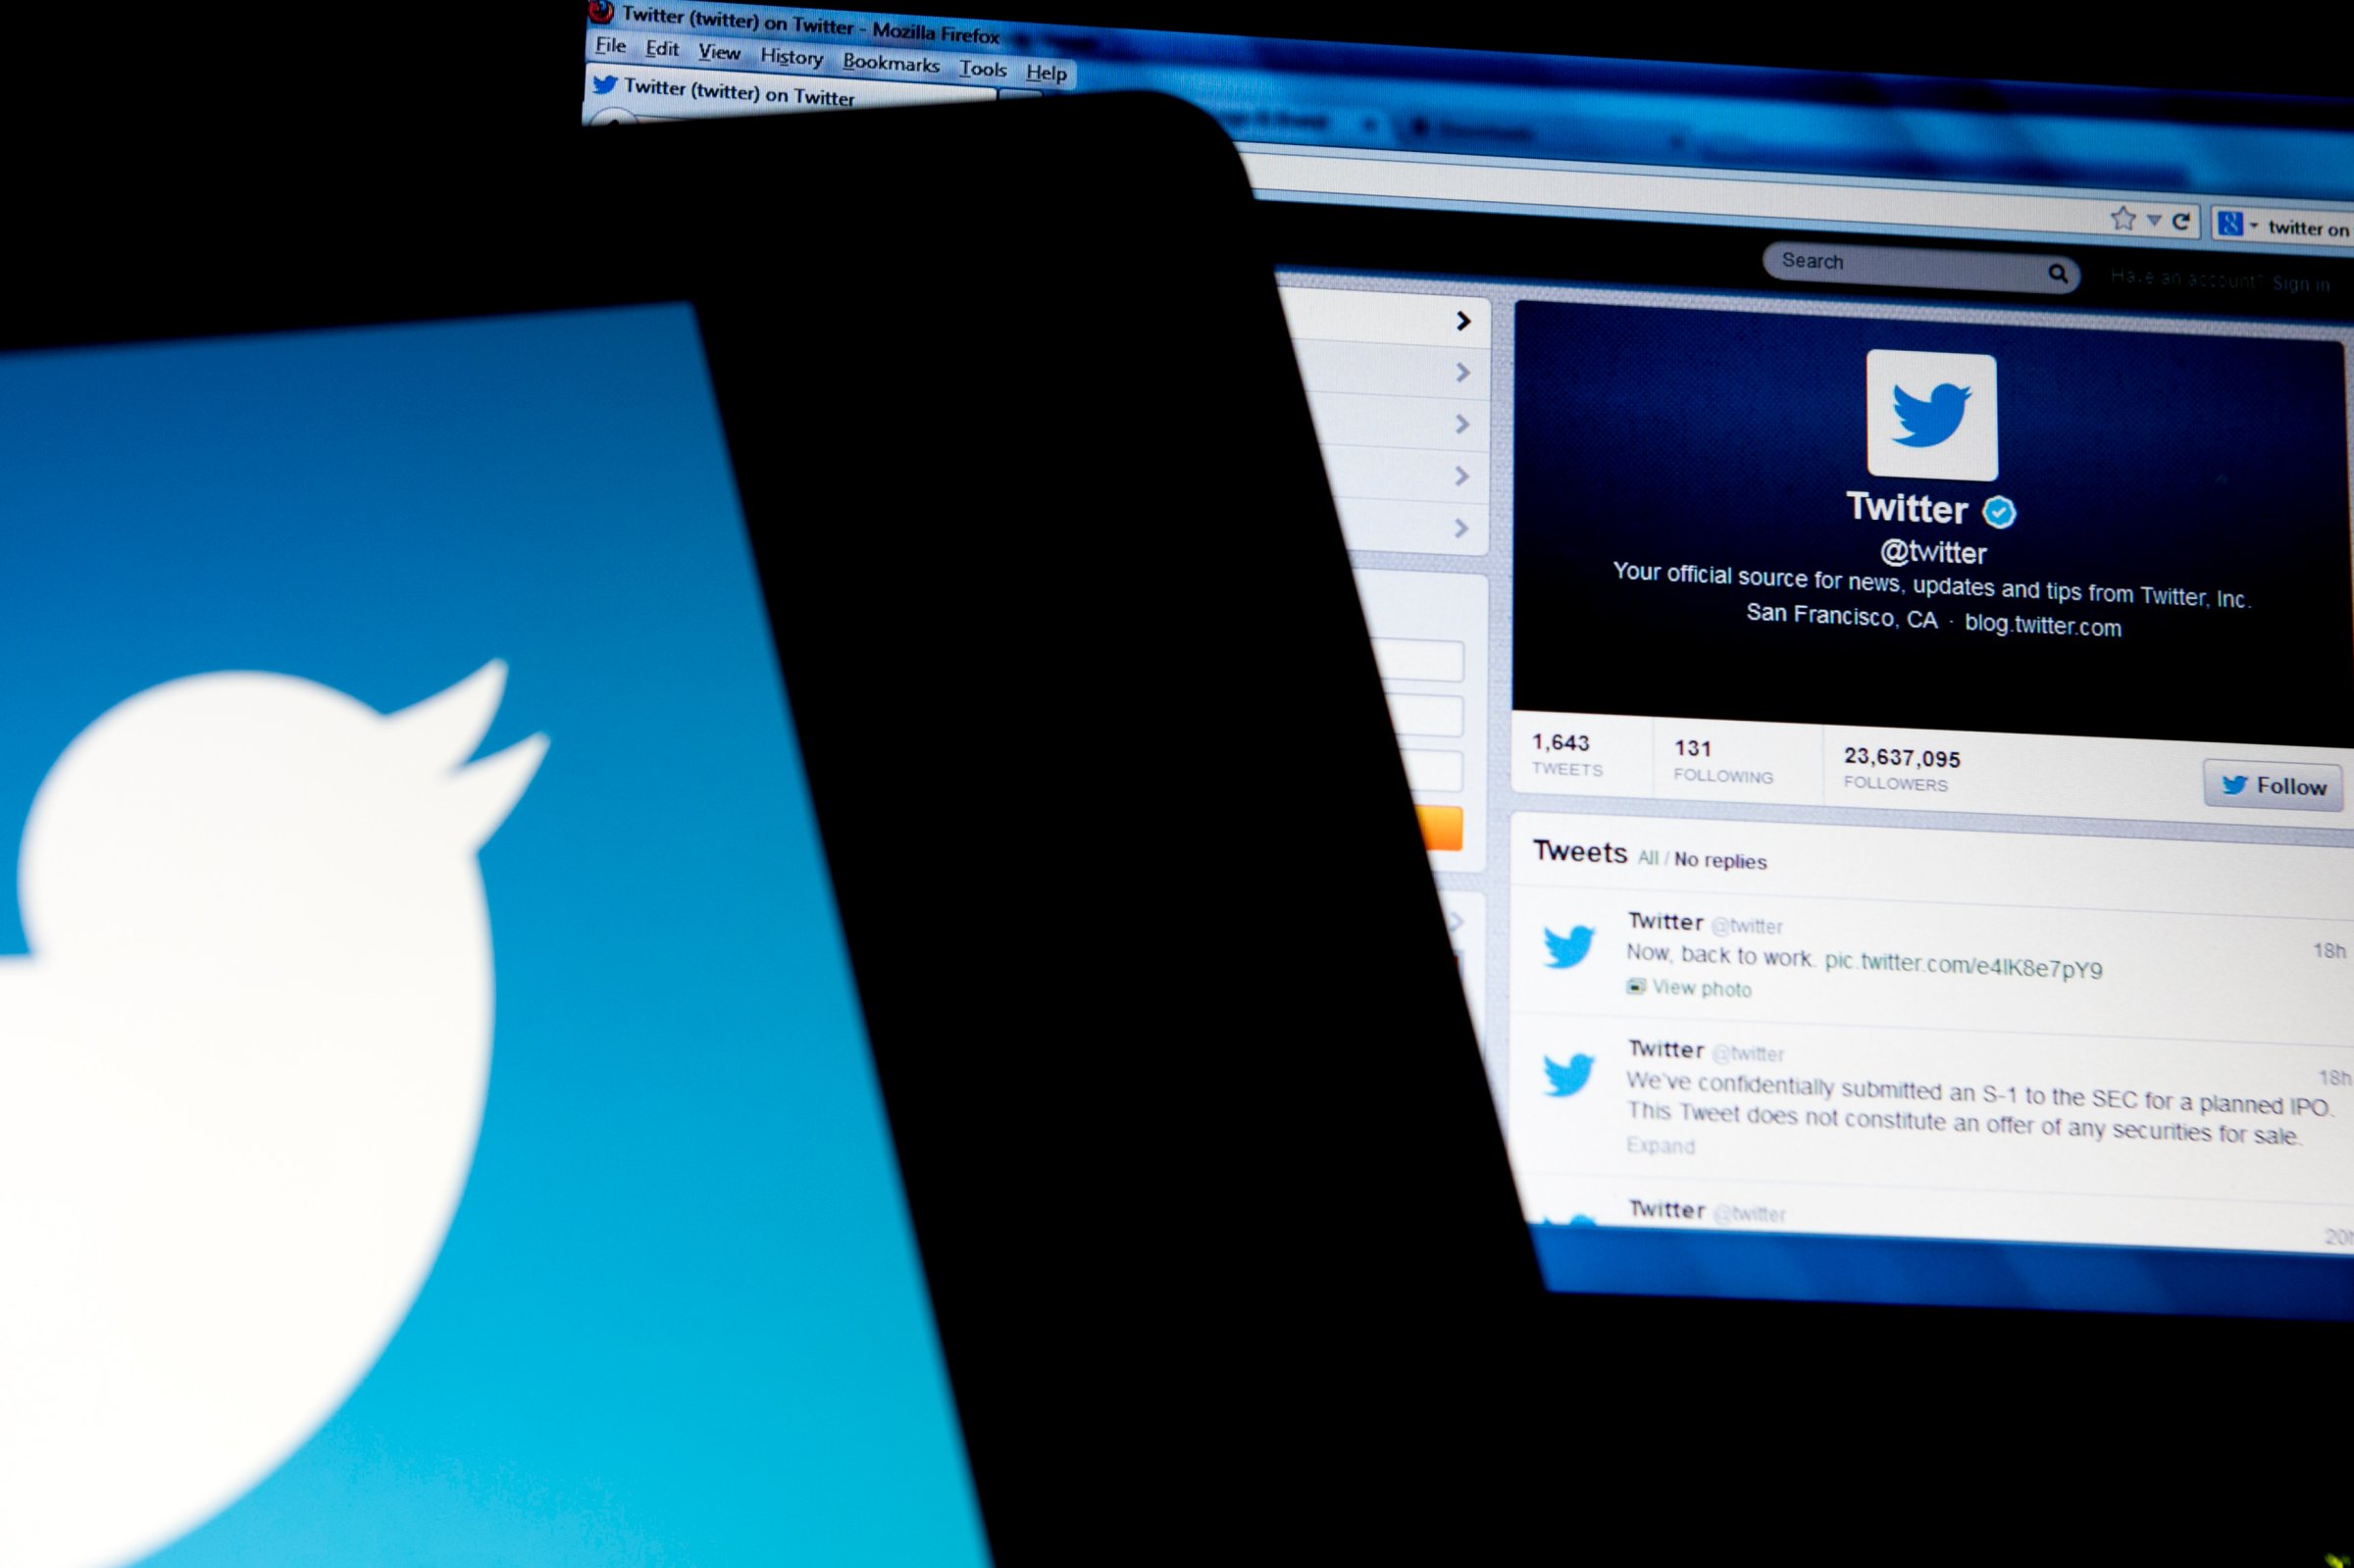 Stranger danger: There are more than bad words in some malicious Tweets